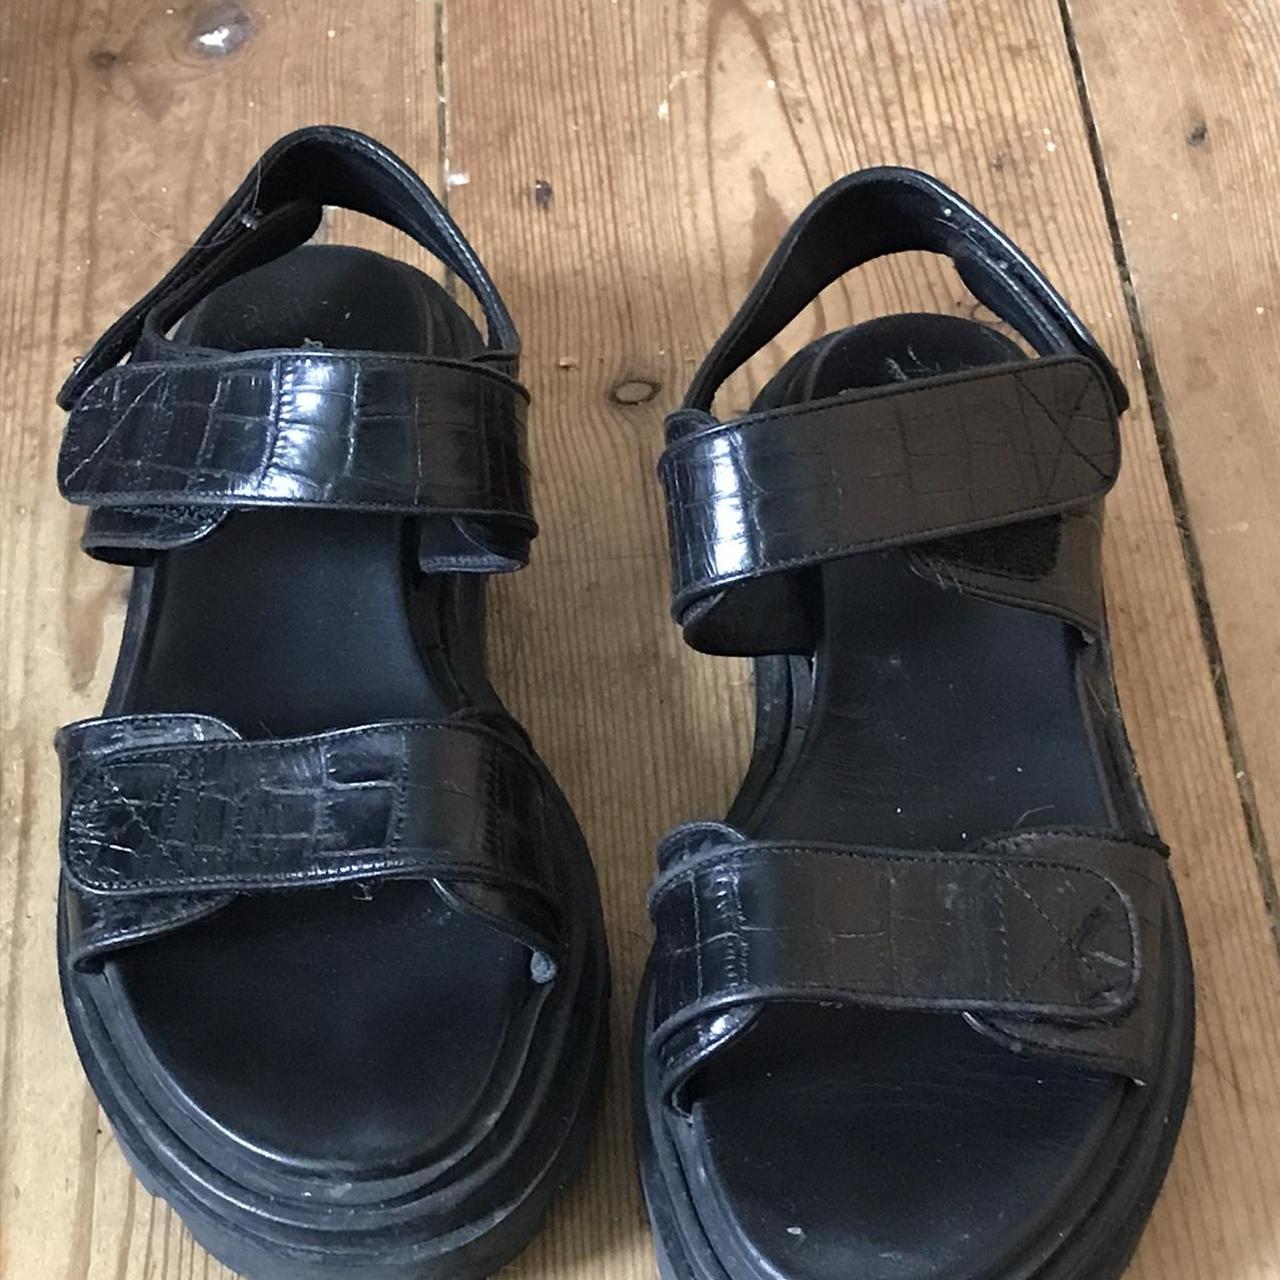 & other stories croc style black sandals, with... - Depop